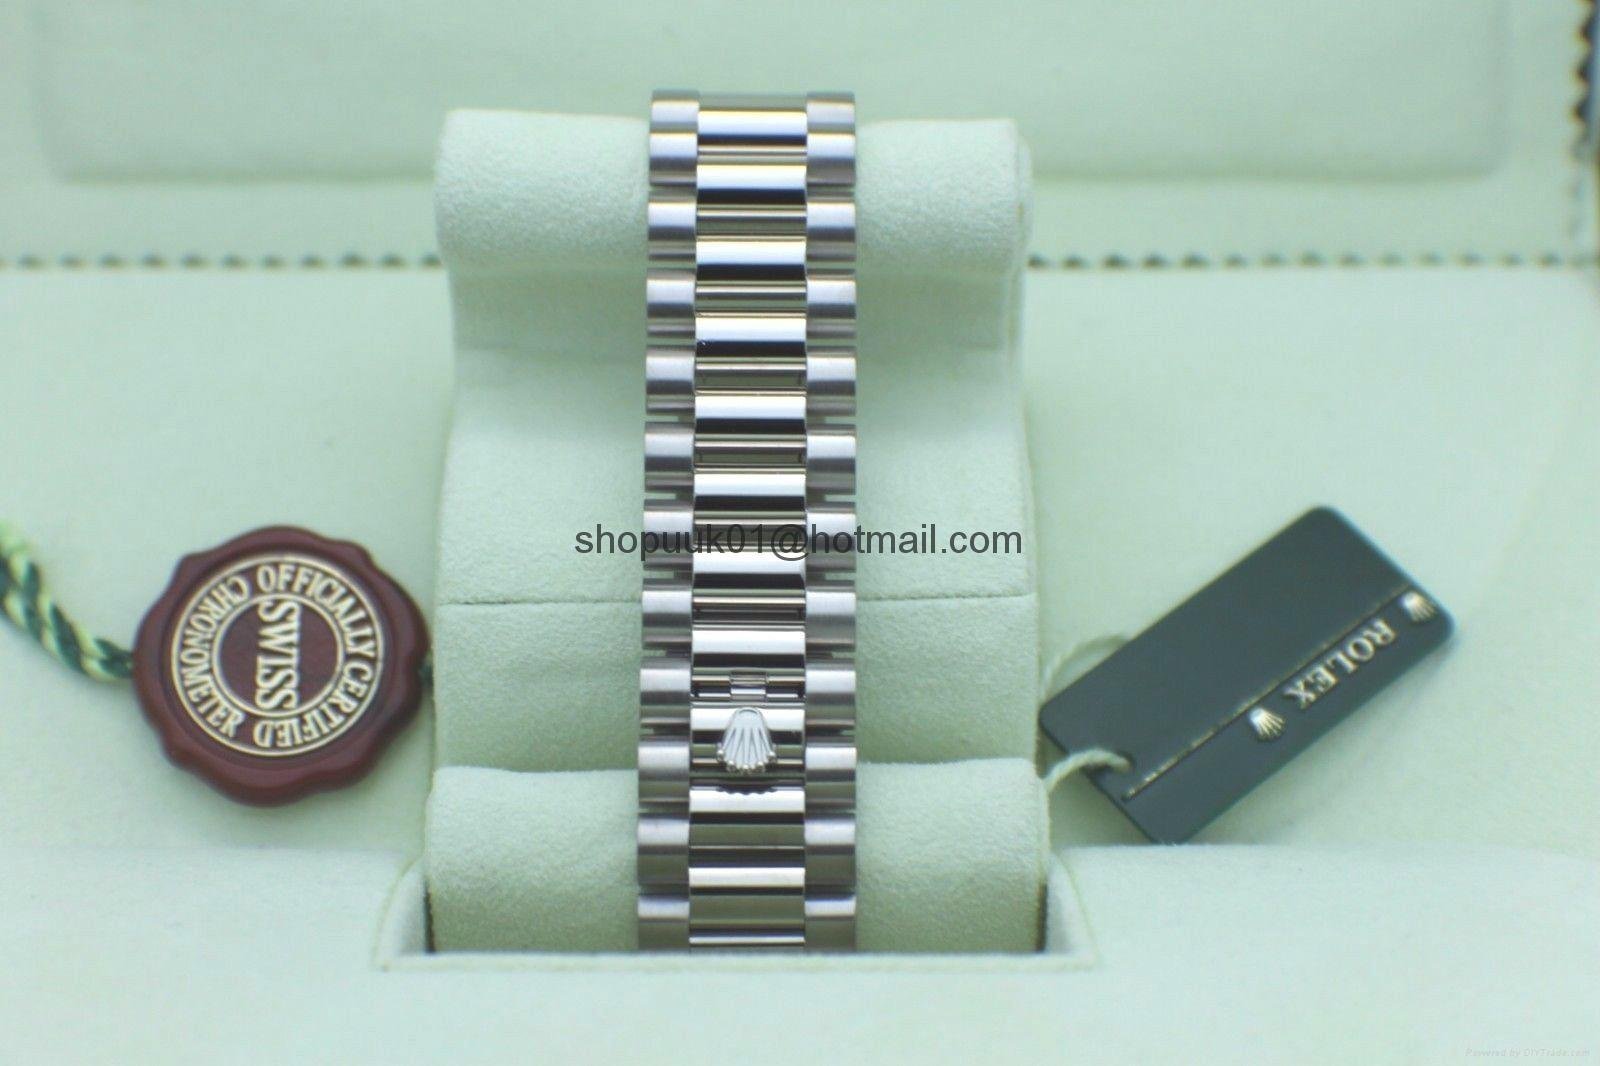 ROLEX PRESIDENT DAY DATE II 18K WHITE GOLD 218239 DIAMOND DIAL BOX & PAPERS 2015 5